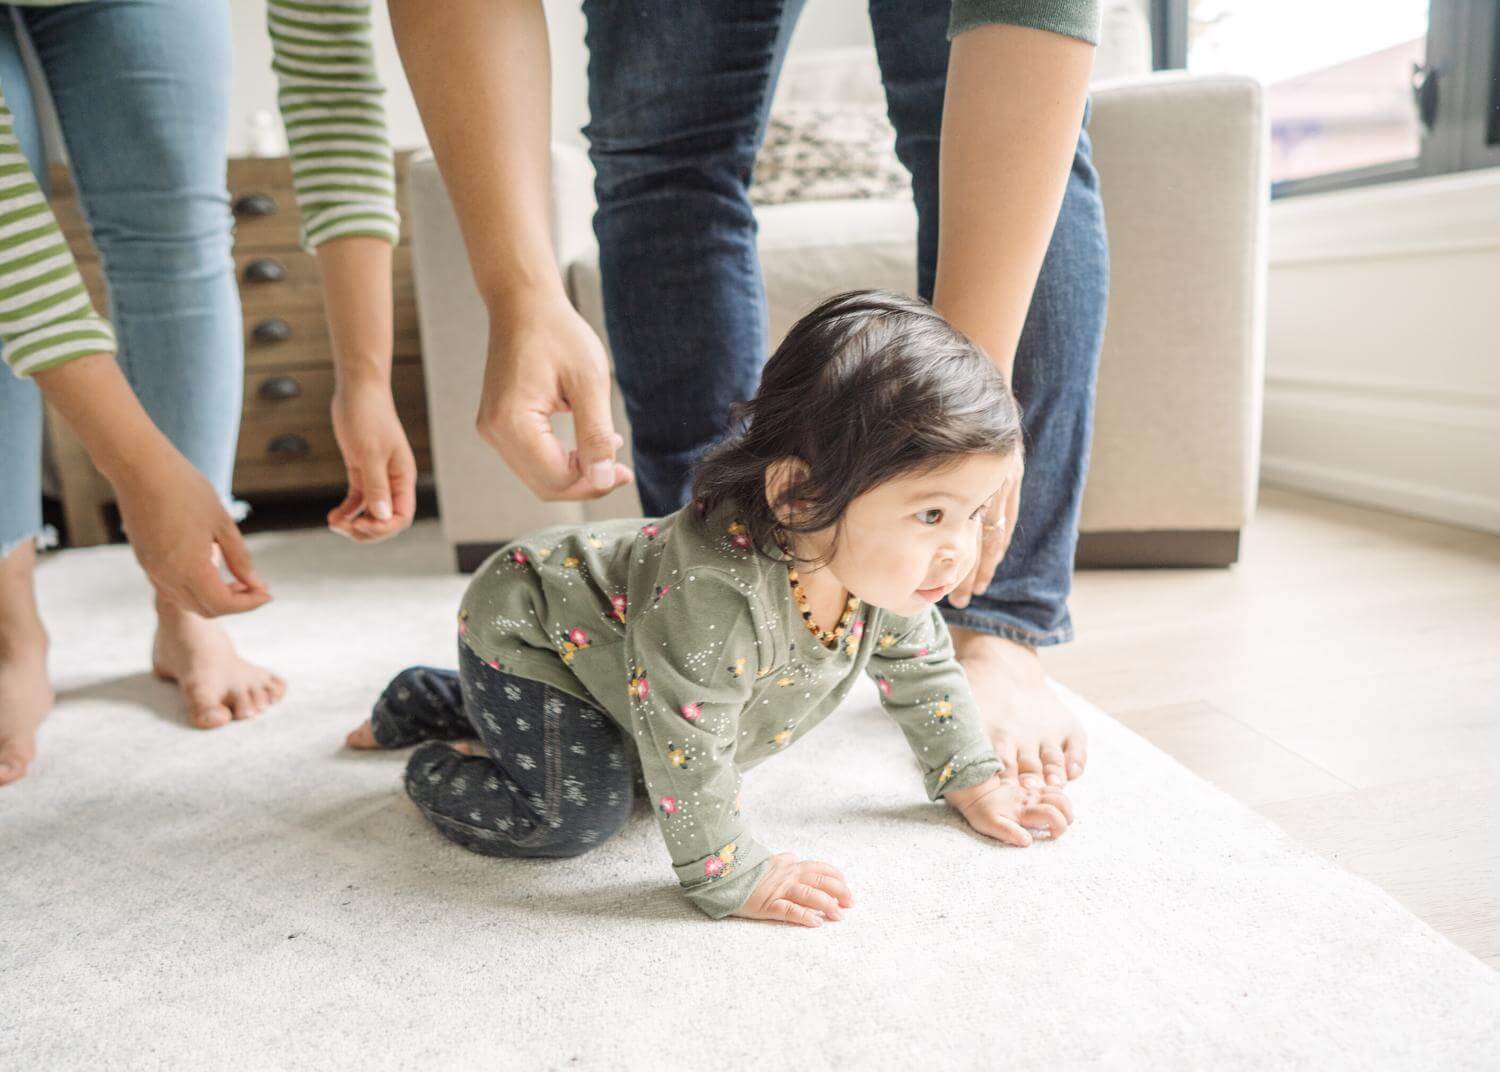 Baby crawling with adults leaning down behind